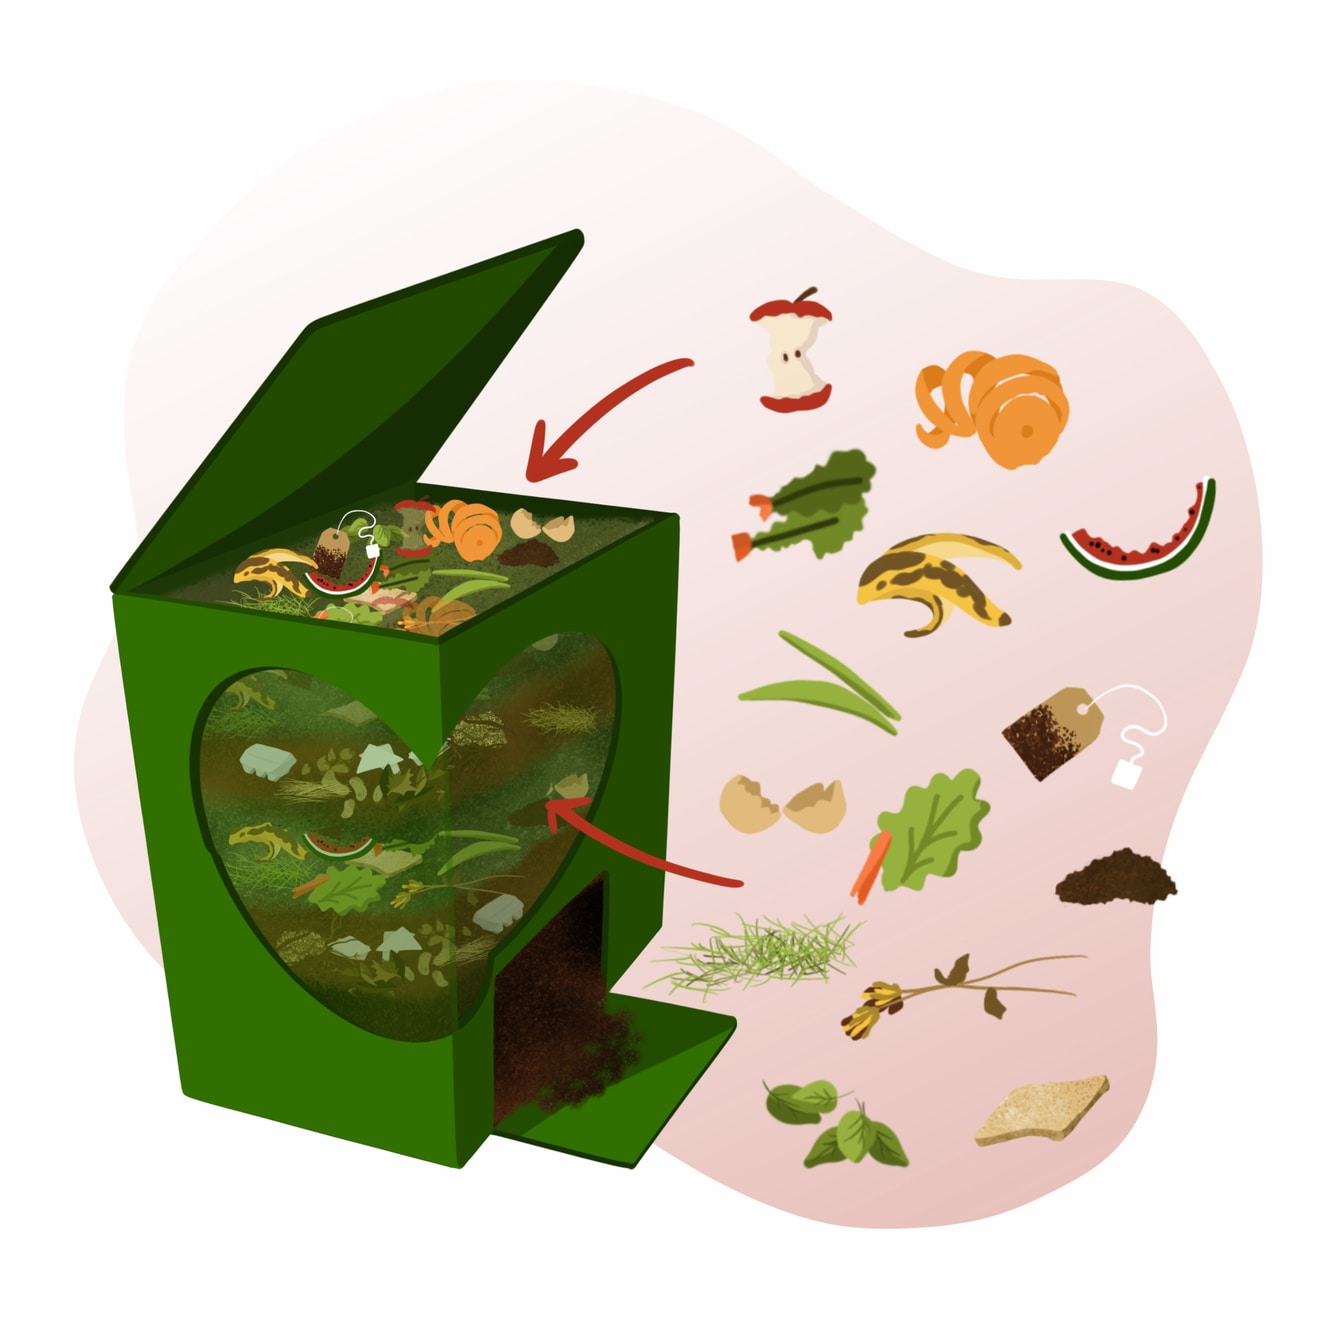 Illustration of home compost bin with green waste: fruit pits and peels, egg shells, tea bags, coffee grounds and leaves.